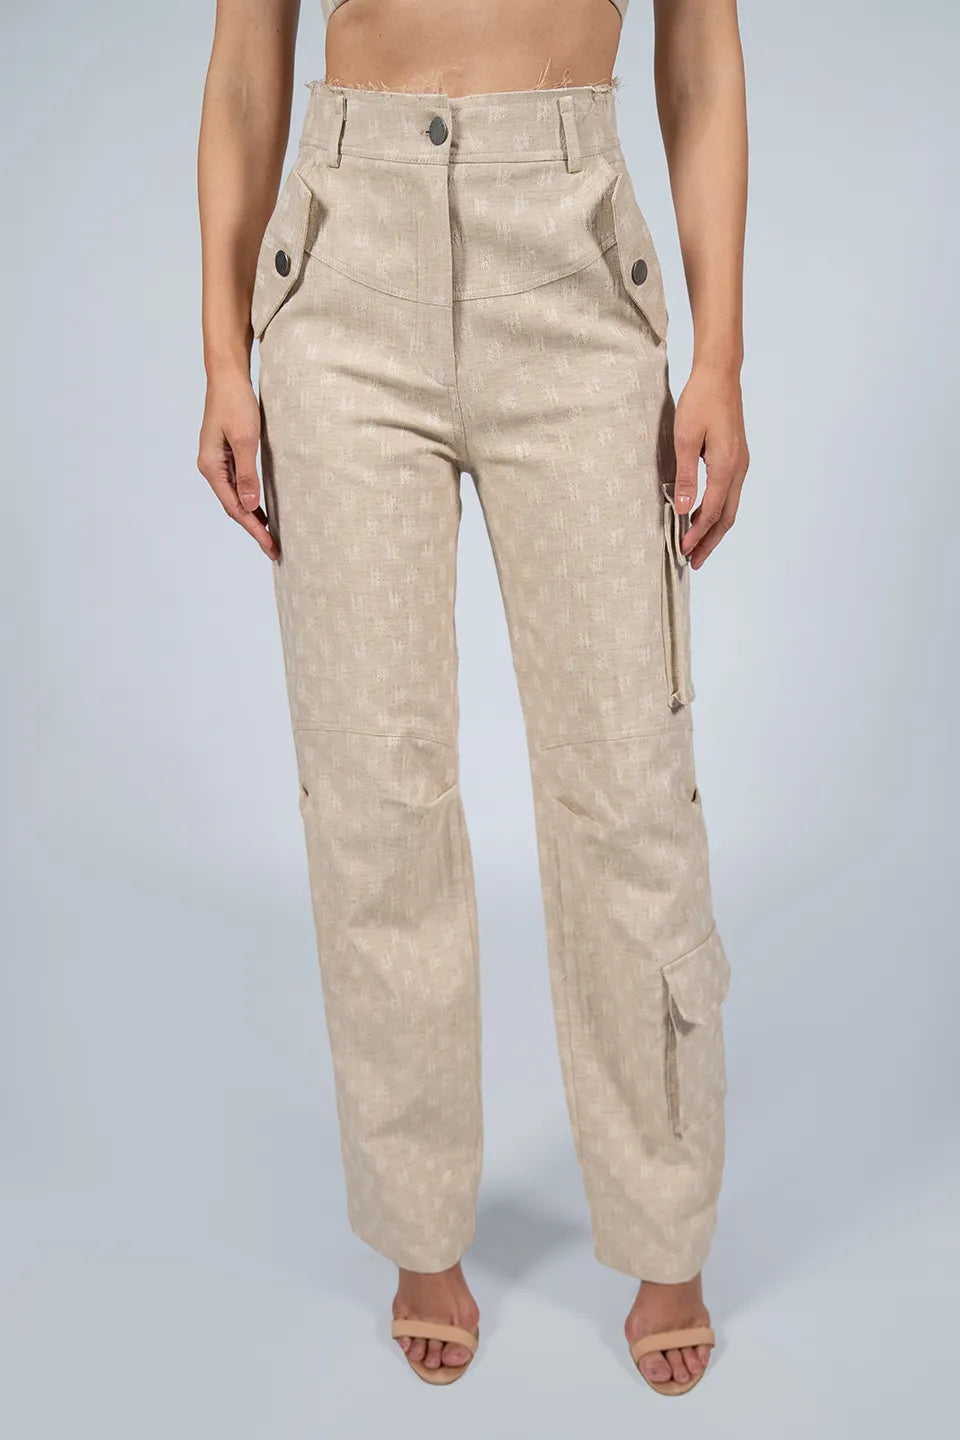 Designer Beige Women pants, shop online with free delivery in UAE. Product gallery 2